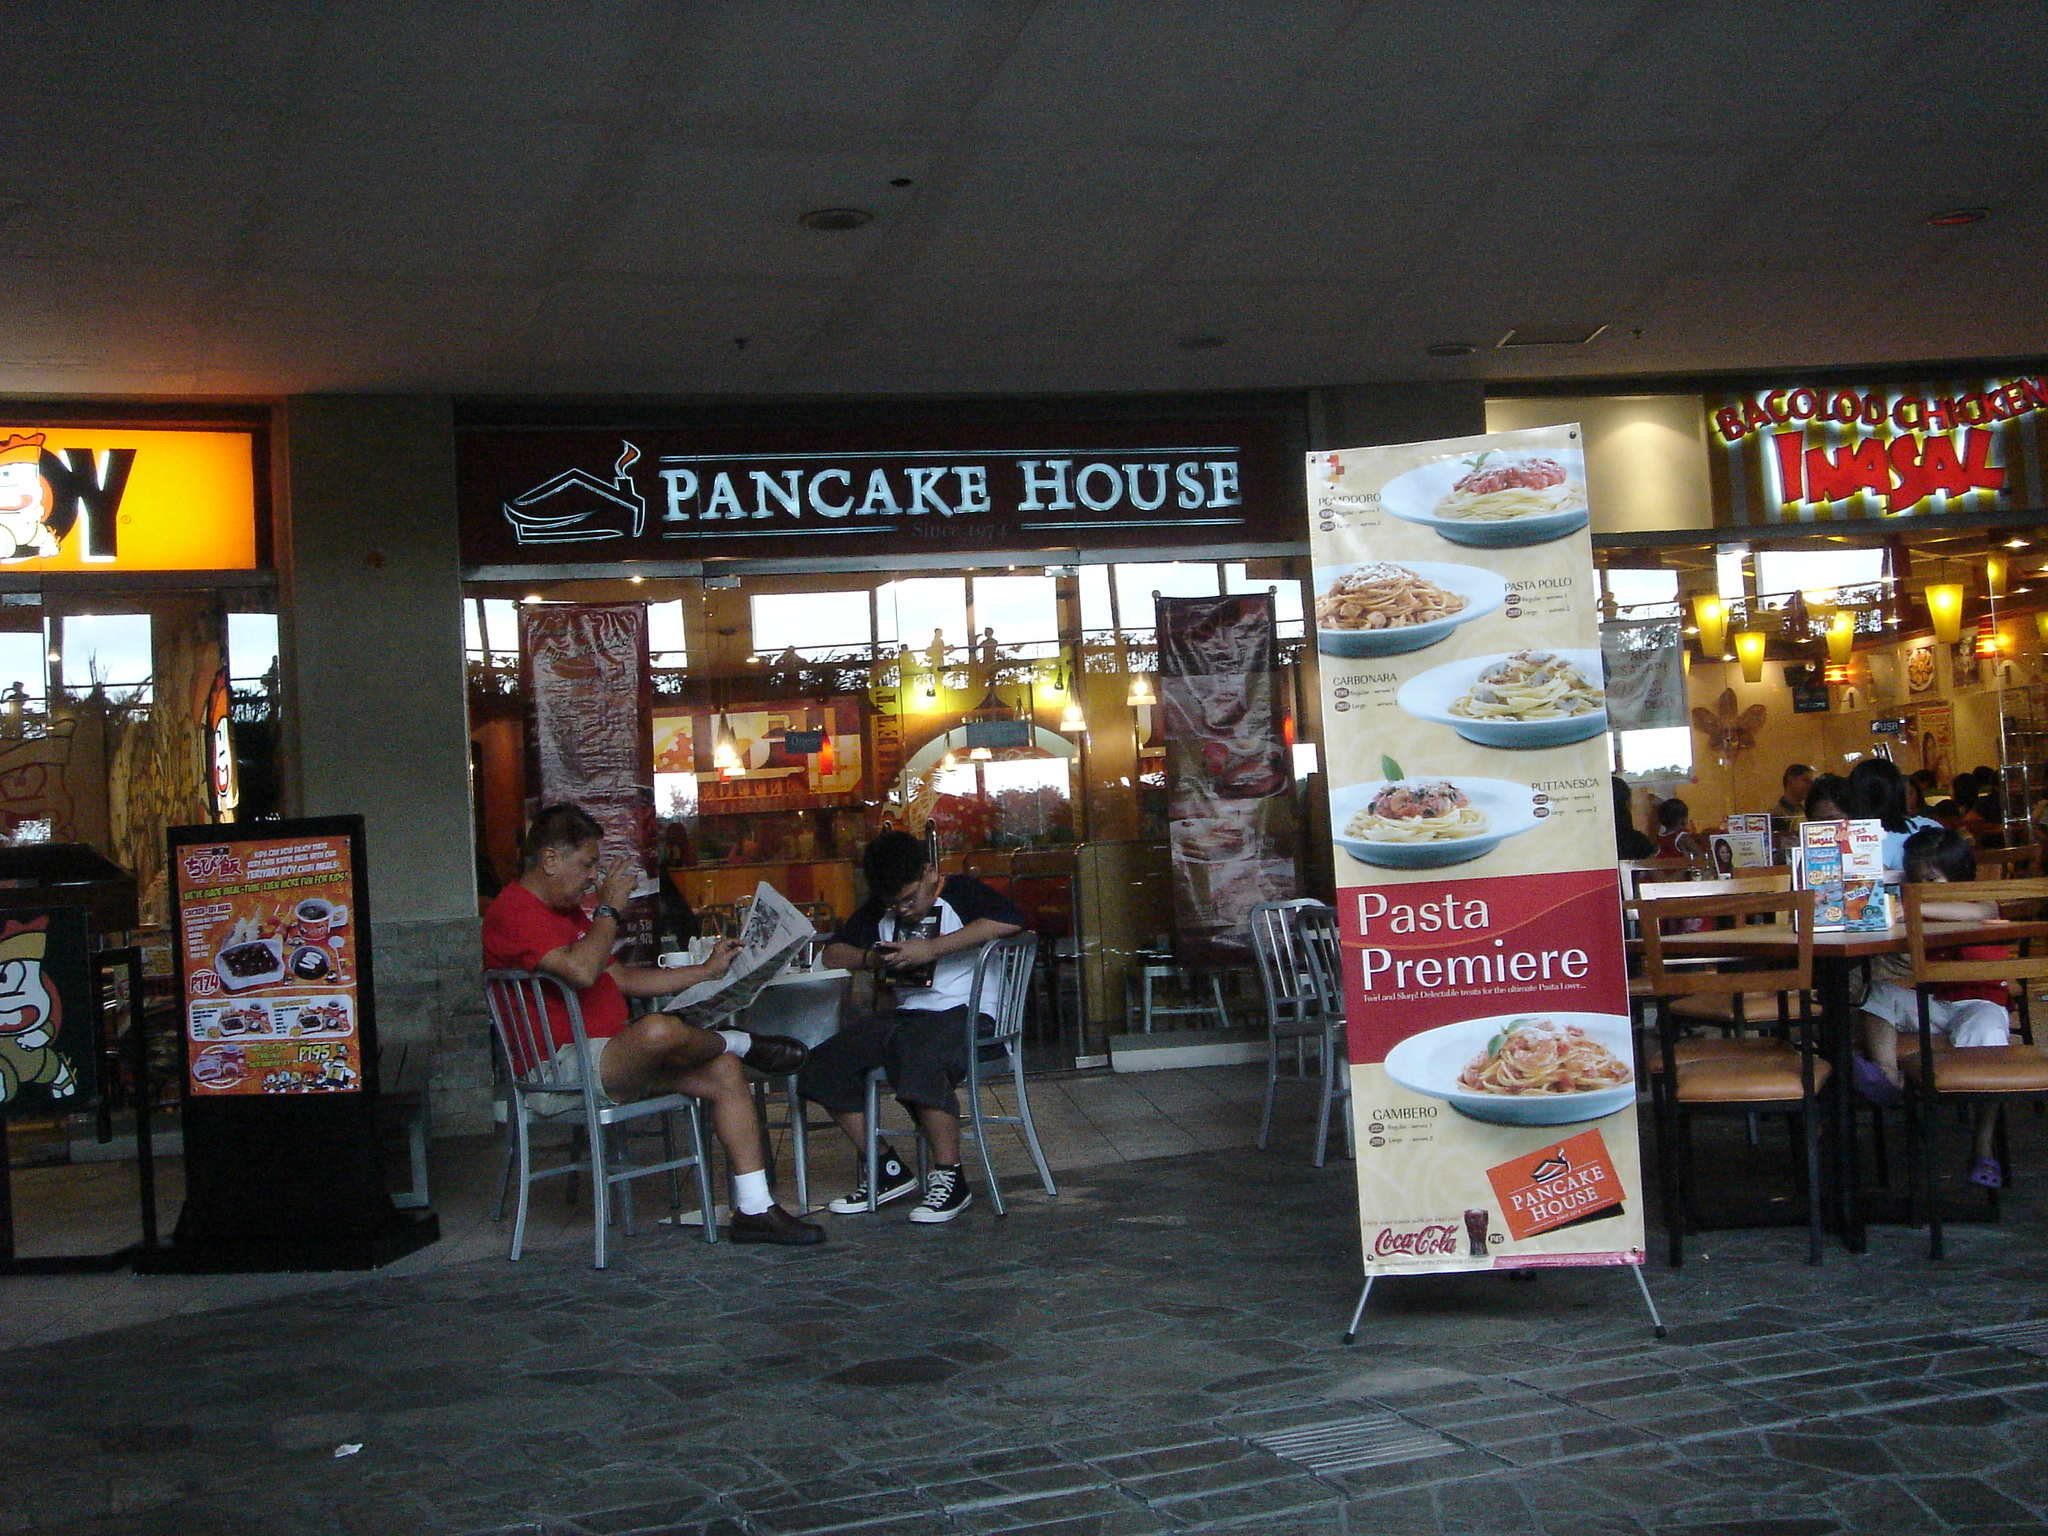 How to Franchise Pancake House